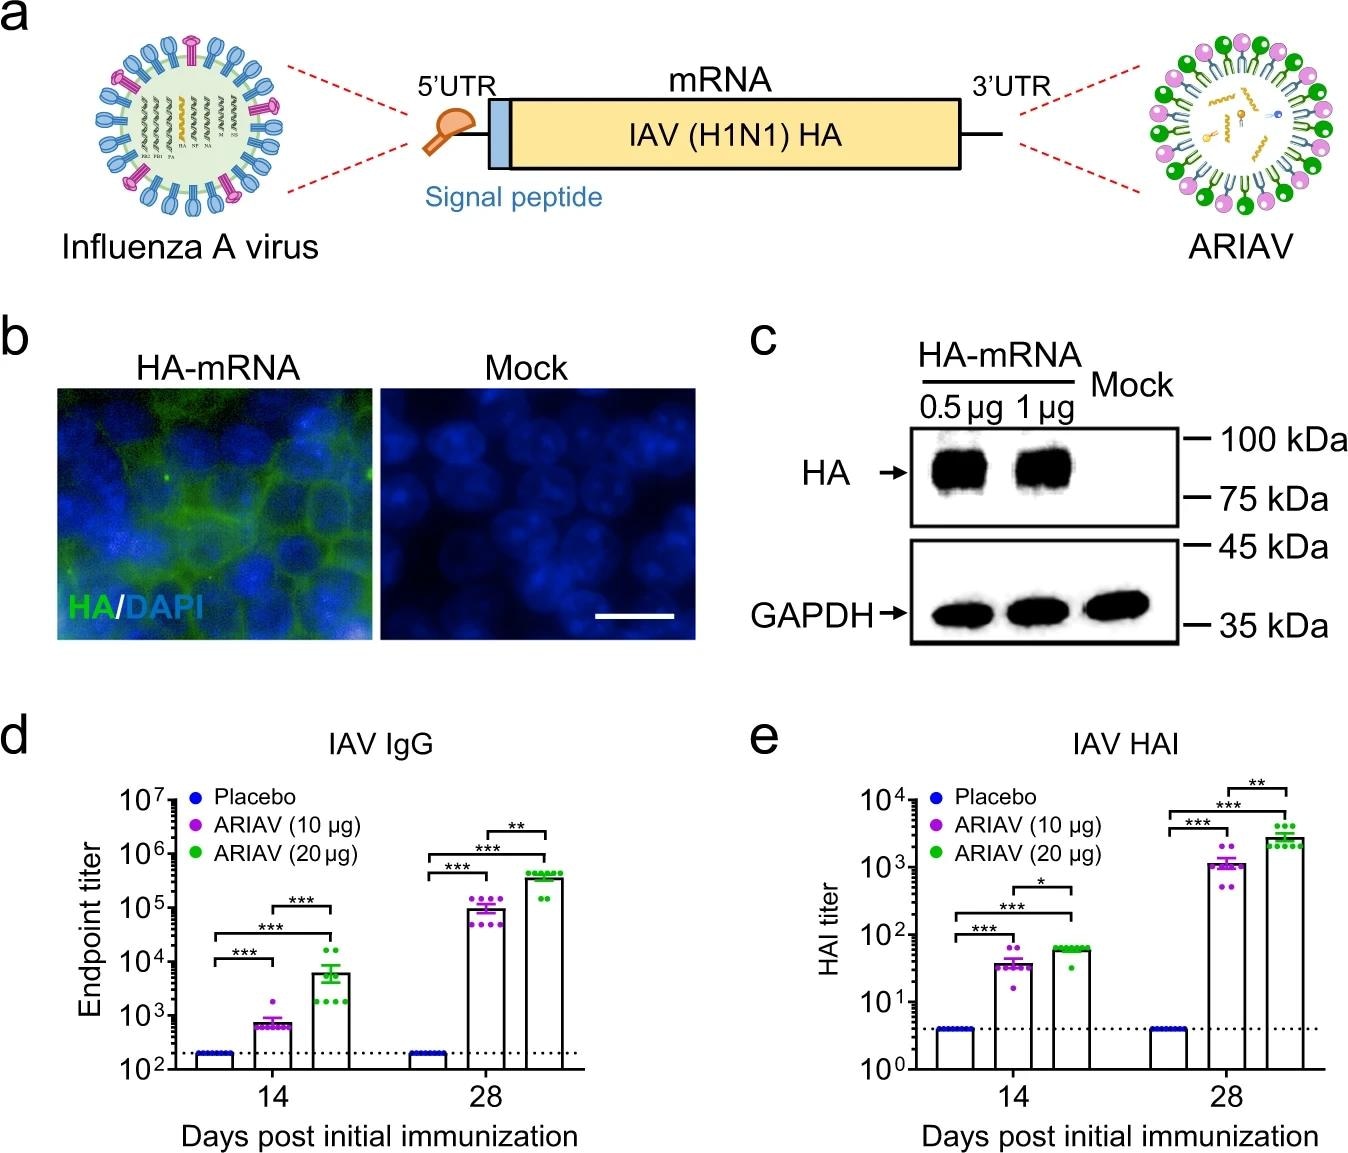 Design and characterization of ARIAV mRNA-LNP encoding HA protein of the influenza A (H1N1) virus as a vaccine candidate.  a schematic diagram of ARIAV, which encodes the full-length HA protein.  b Indirect immunofluorescence assay of HA protein expression in HEK293T cells 48 hours after transfection.  Scale bar, 20 m. c HA expression in HEK293T cells was determined by immunoblotting.  d HA specific IgG antibody titers were determined by ELISA.  Hemagglutination Inhibition (HAI) titers were determined 14 and 28 days after the first immunization.  Data are presented as the mean ± SEM (n = 8).  Statistical differences were analyzed using two-tailed unpaired t-tests.  *P < 0.05,**P < 0.01, ***P < 0,001.